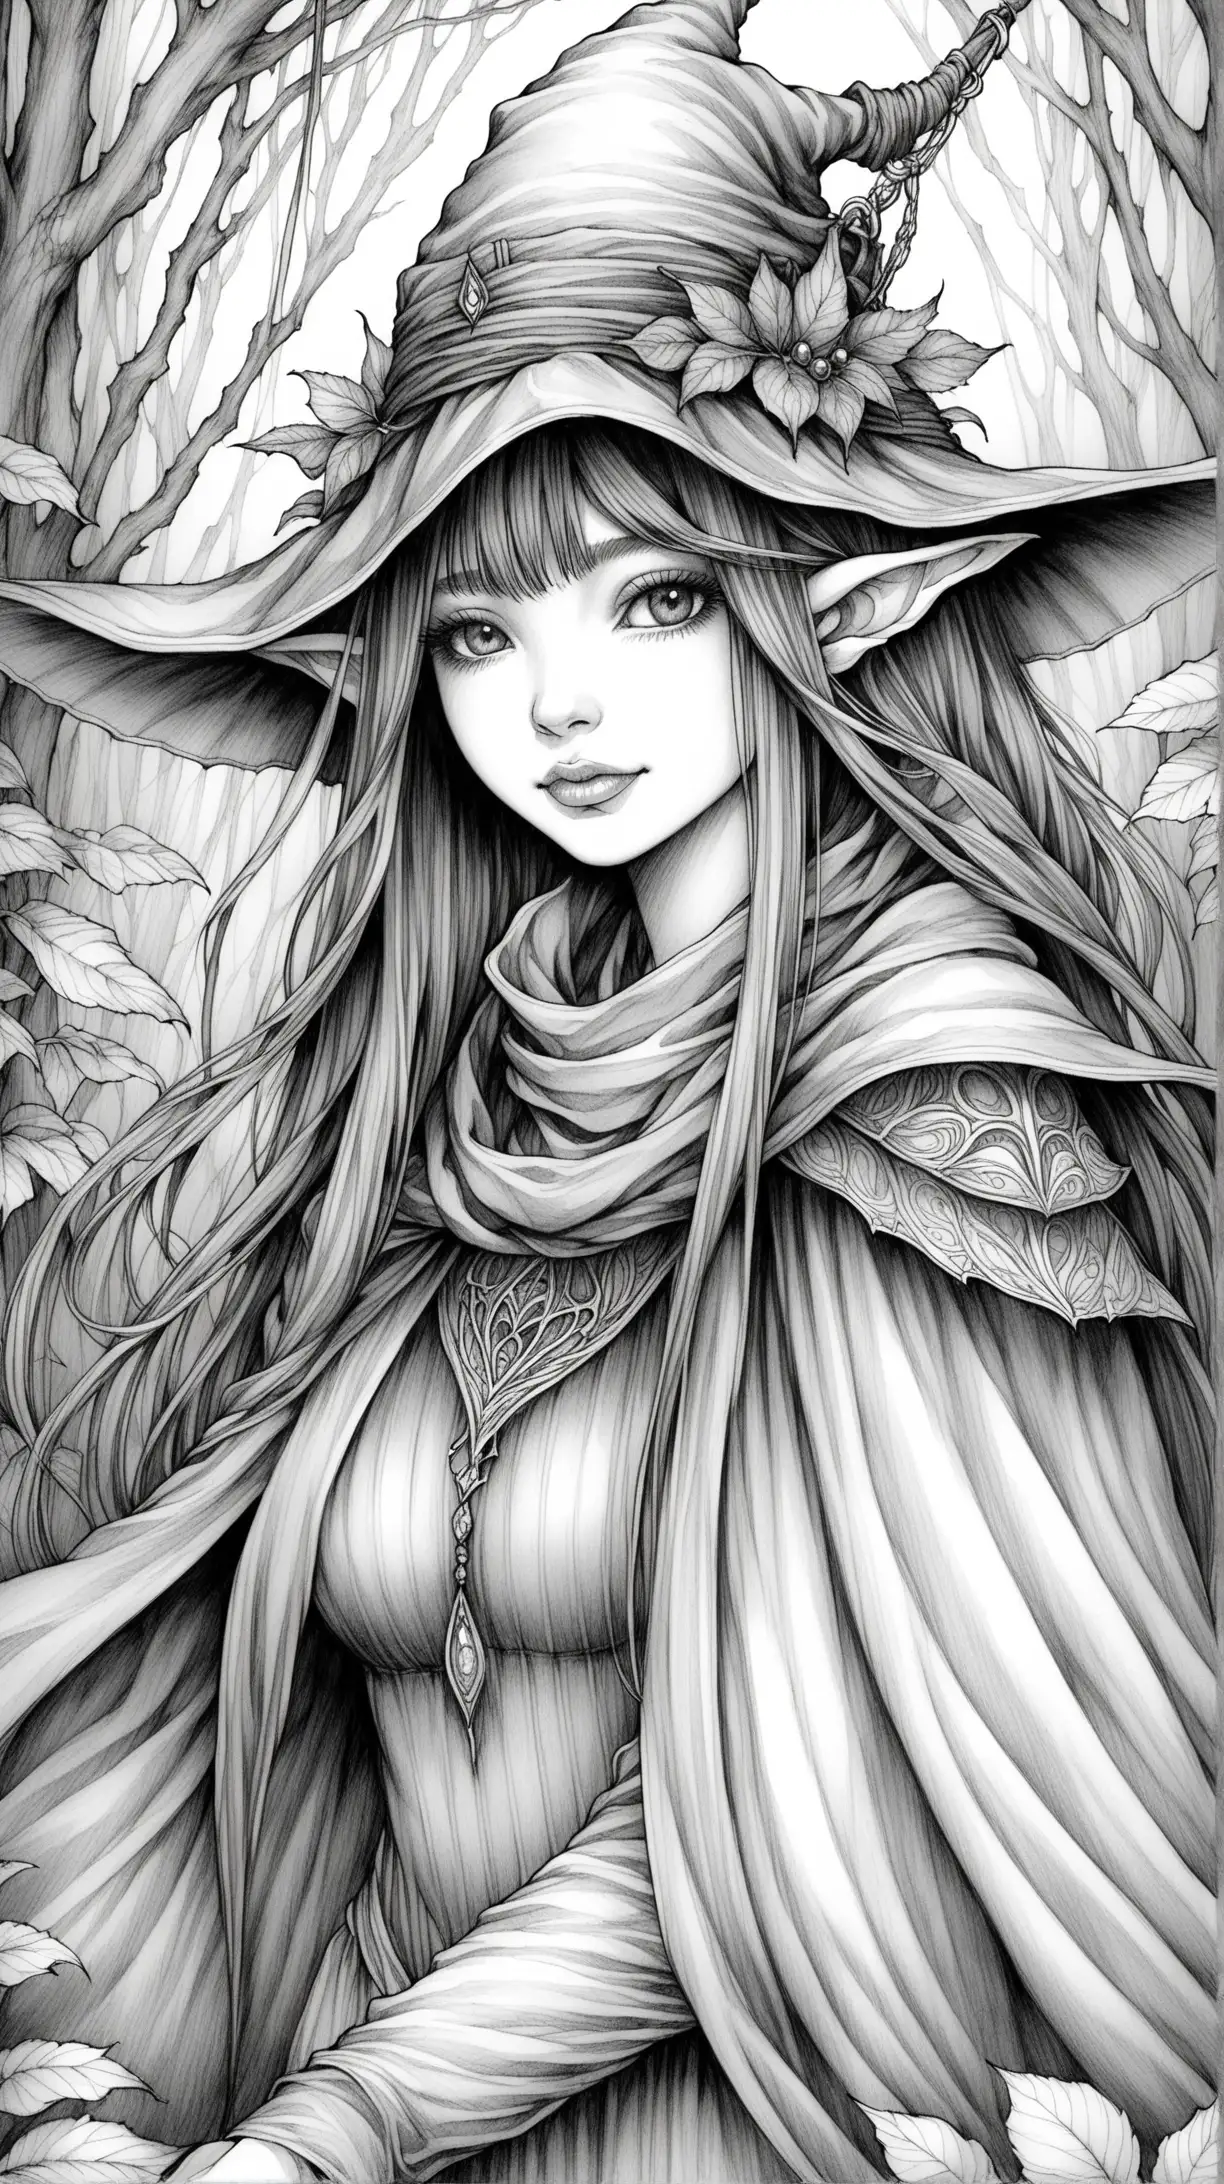 Fantasy Fashion Coloring Book Illustration Inspired by Brian Froud